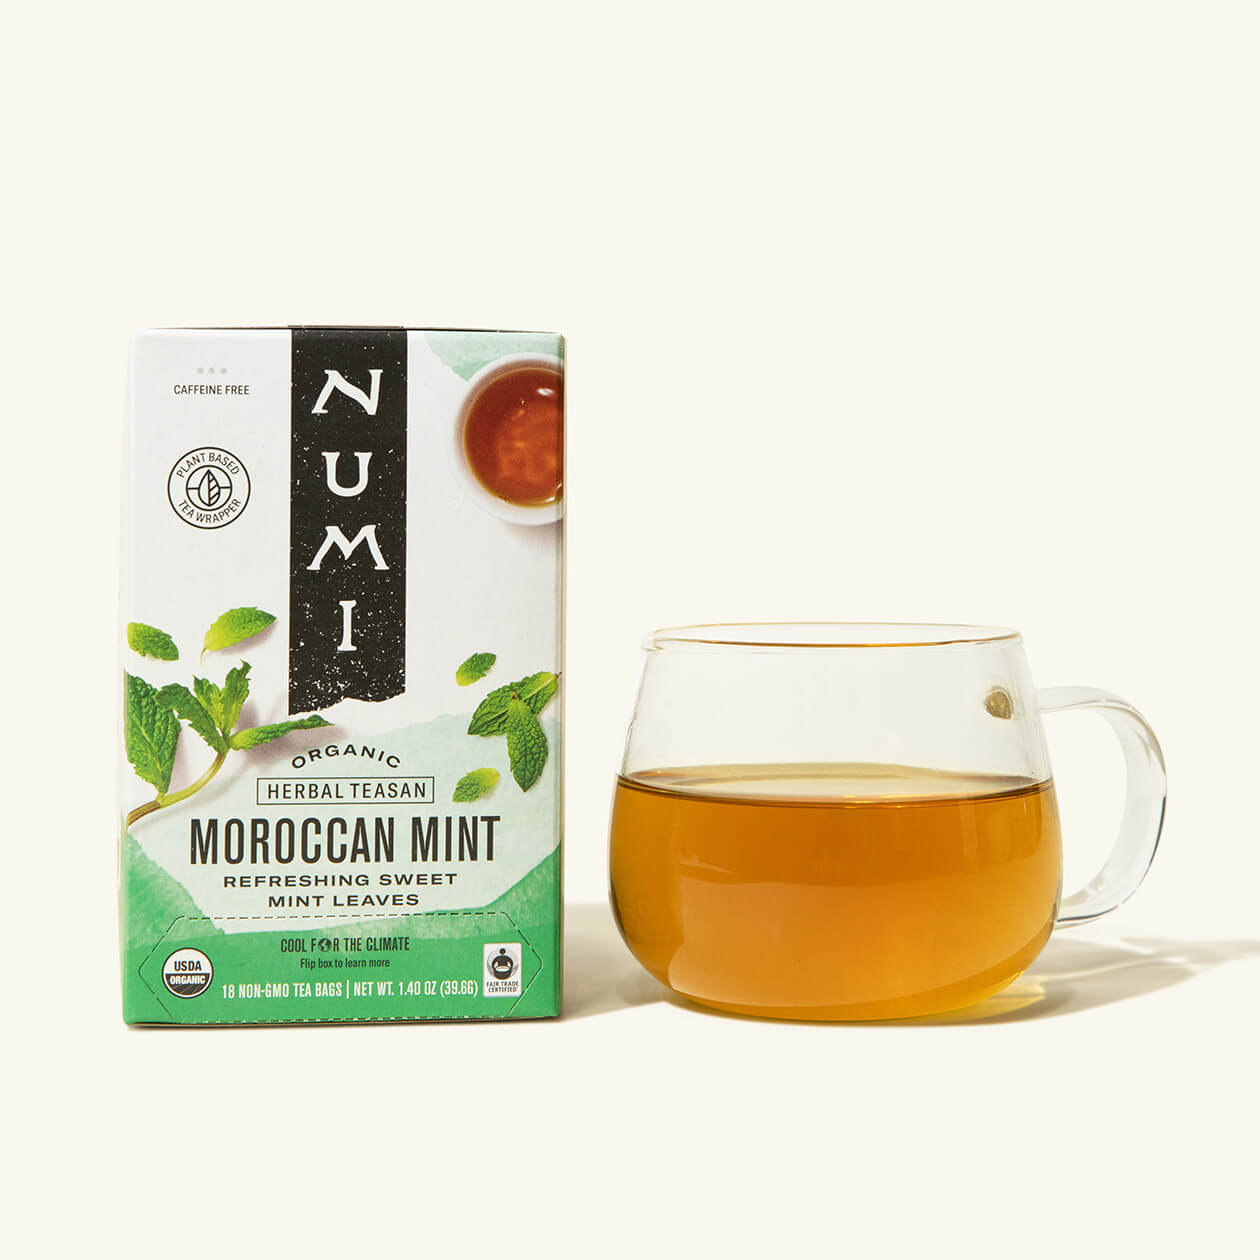 A box of Numi's Moroccan Mint tea next to a brewed cup of tea in a clear cup